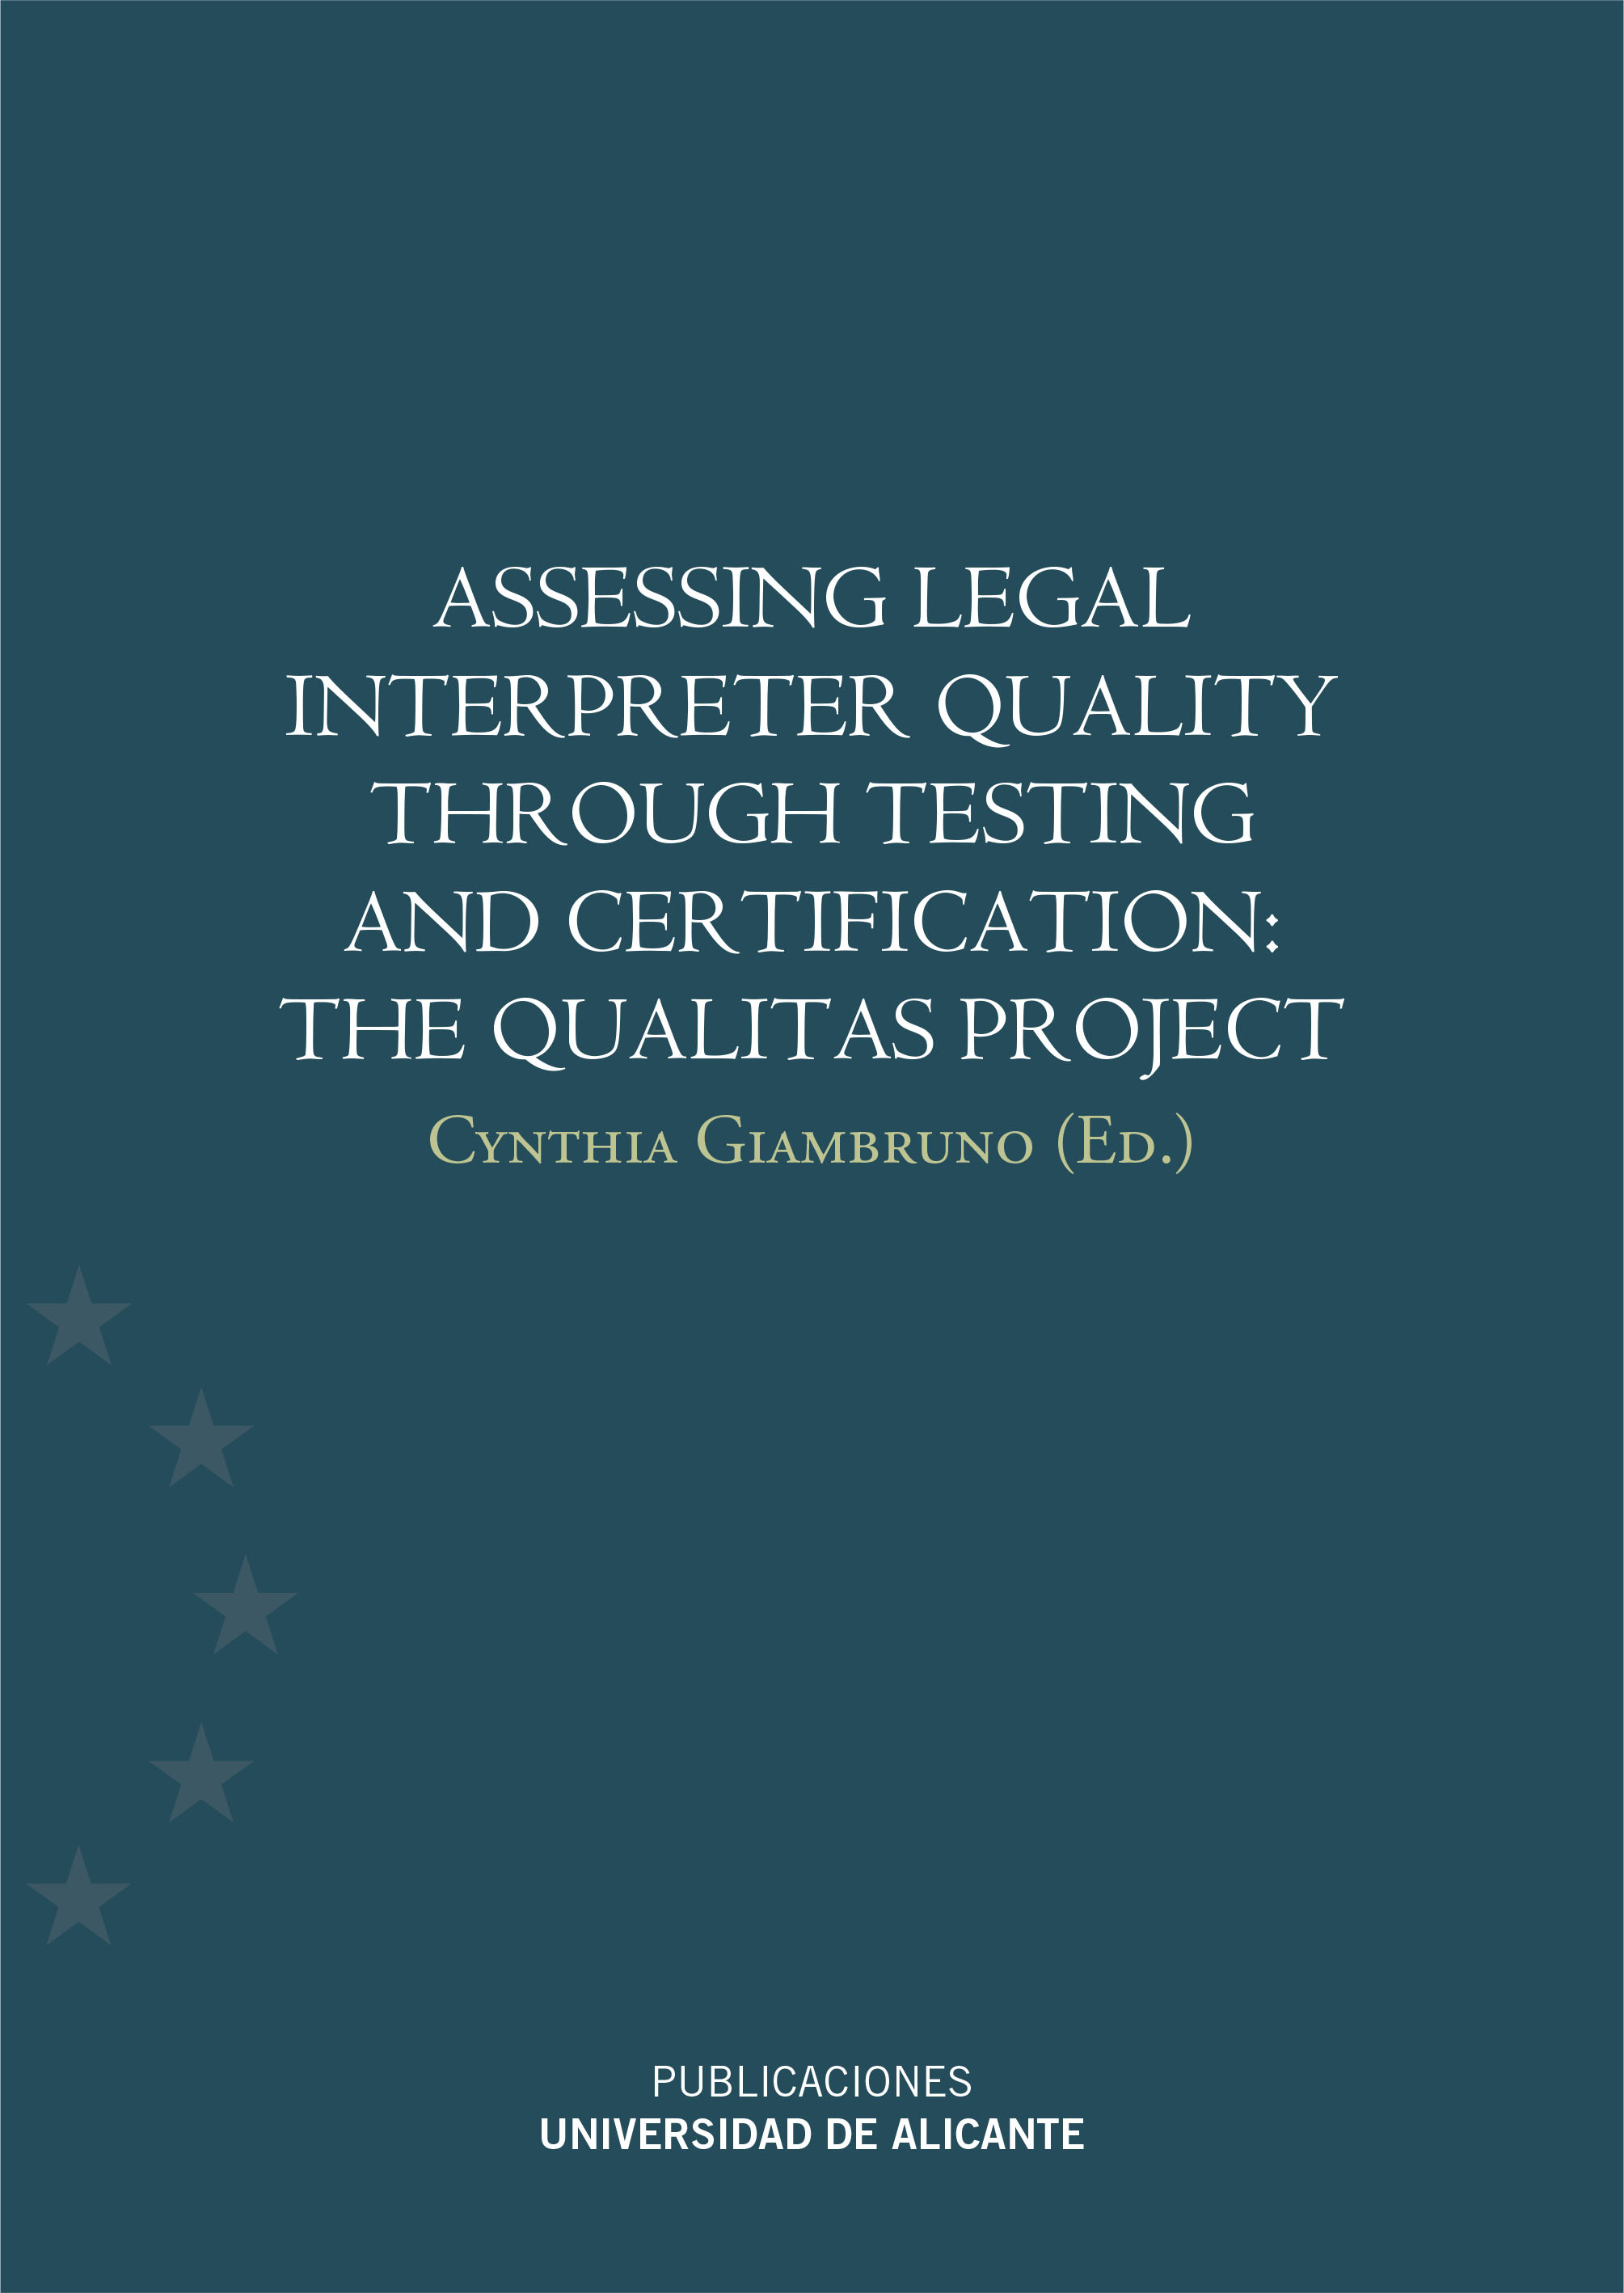 Assessing legal interpreter quality through testing and certification: The Qualitas Project